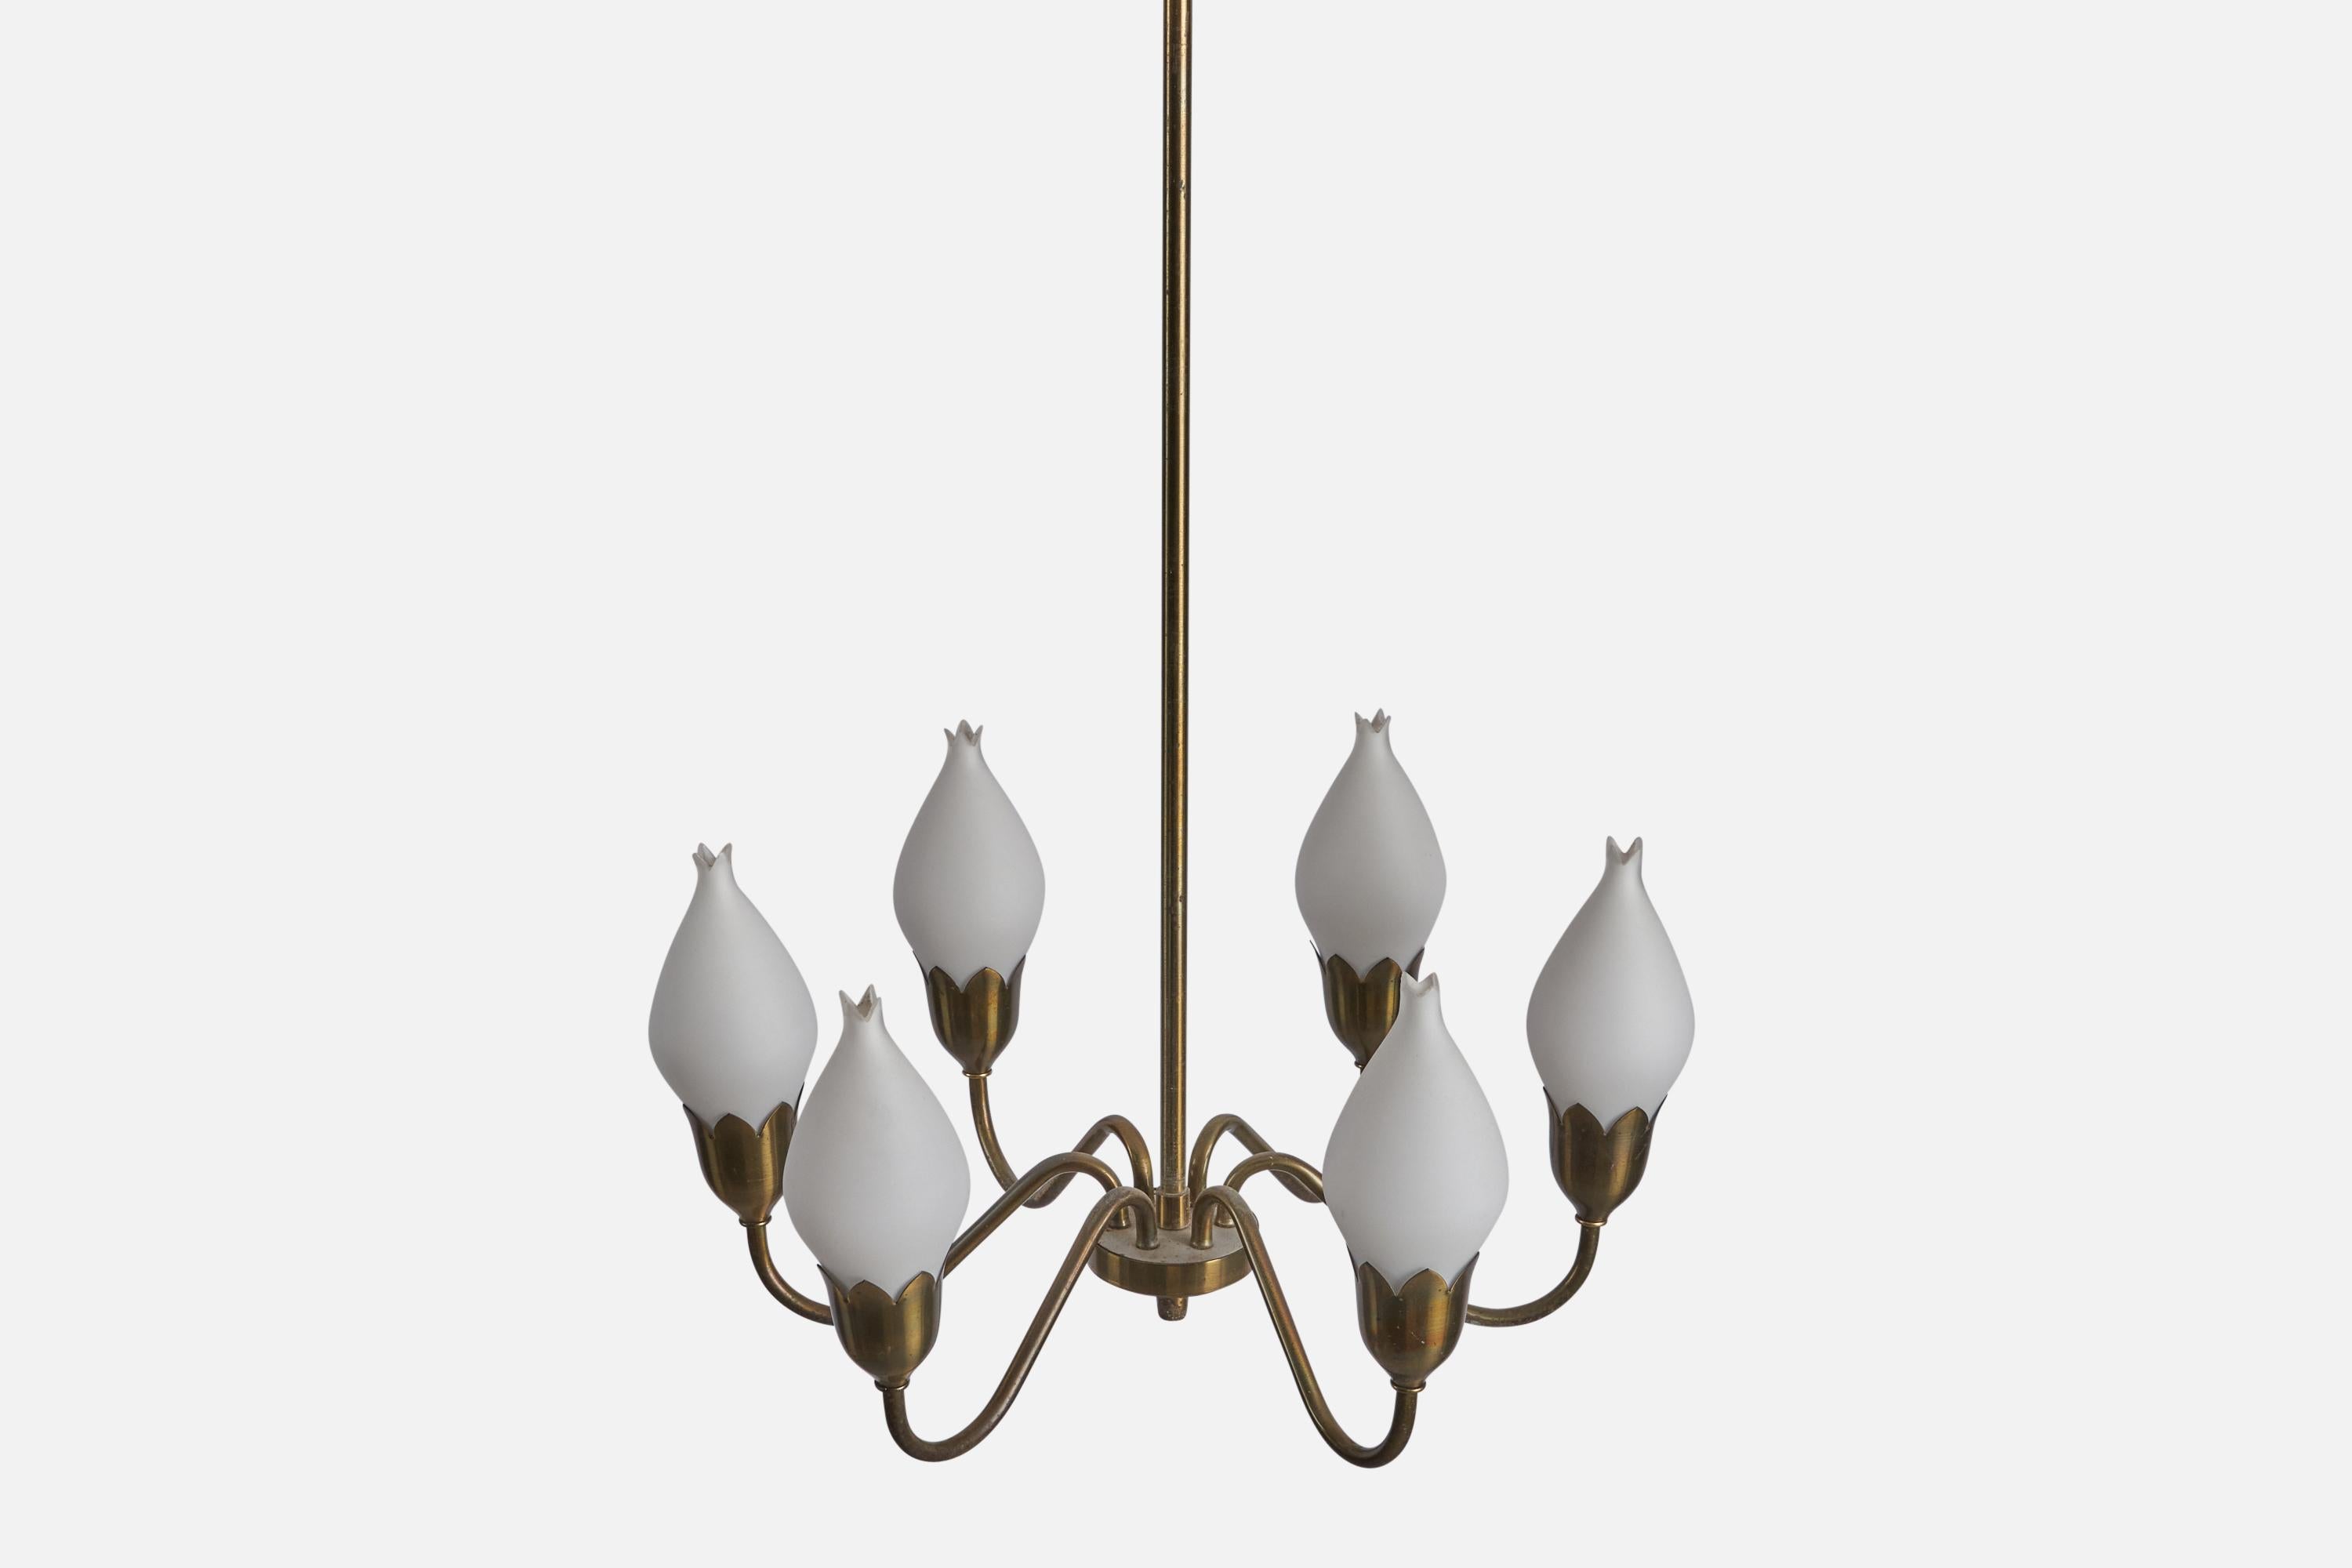 Fog & Mørup, Chandelier, Brass, Glass, Denmark, 1960s In Good Condition For Sale In High Point, NC